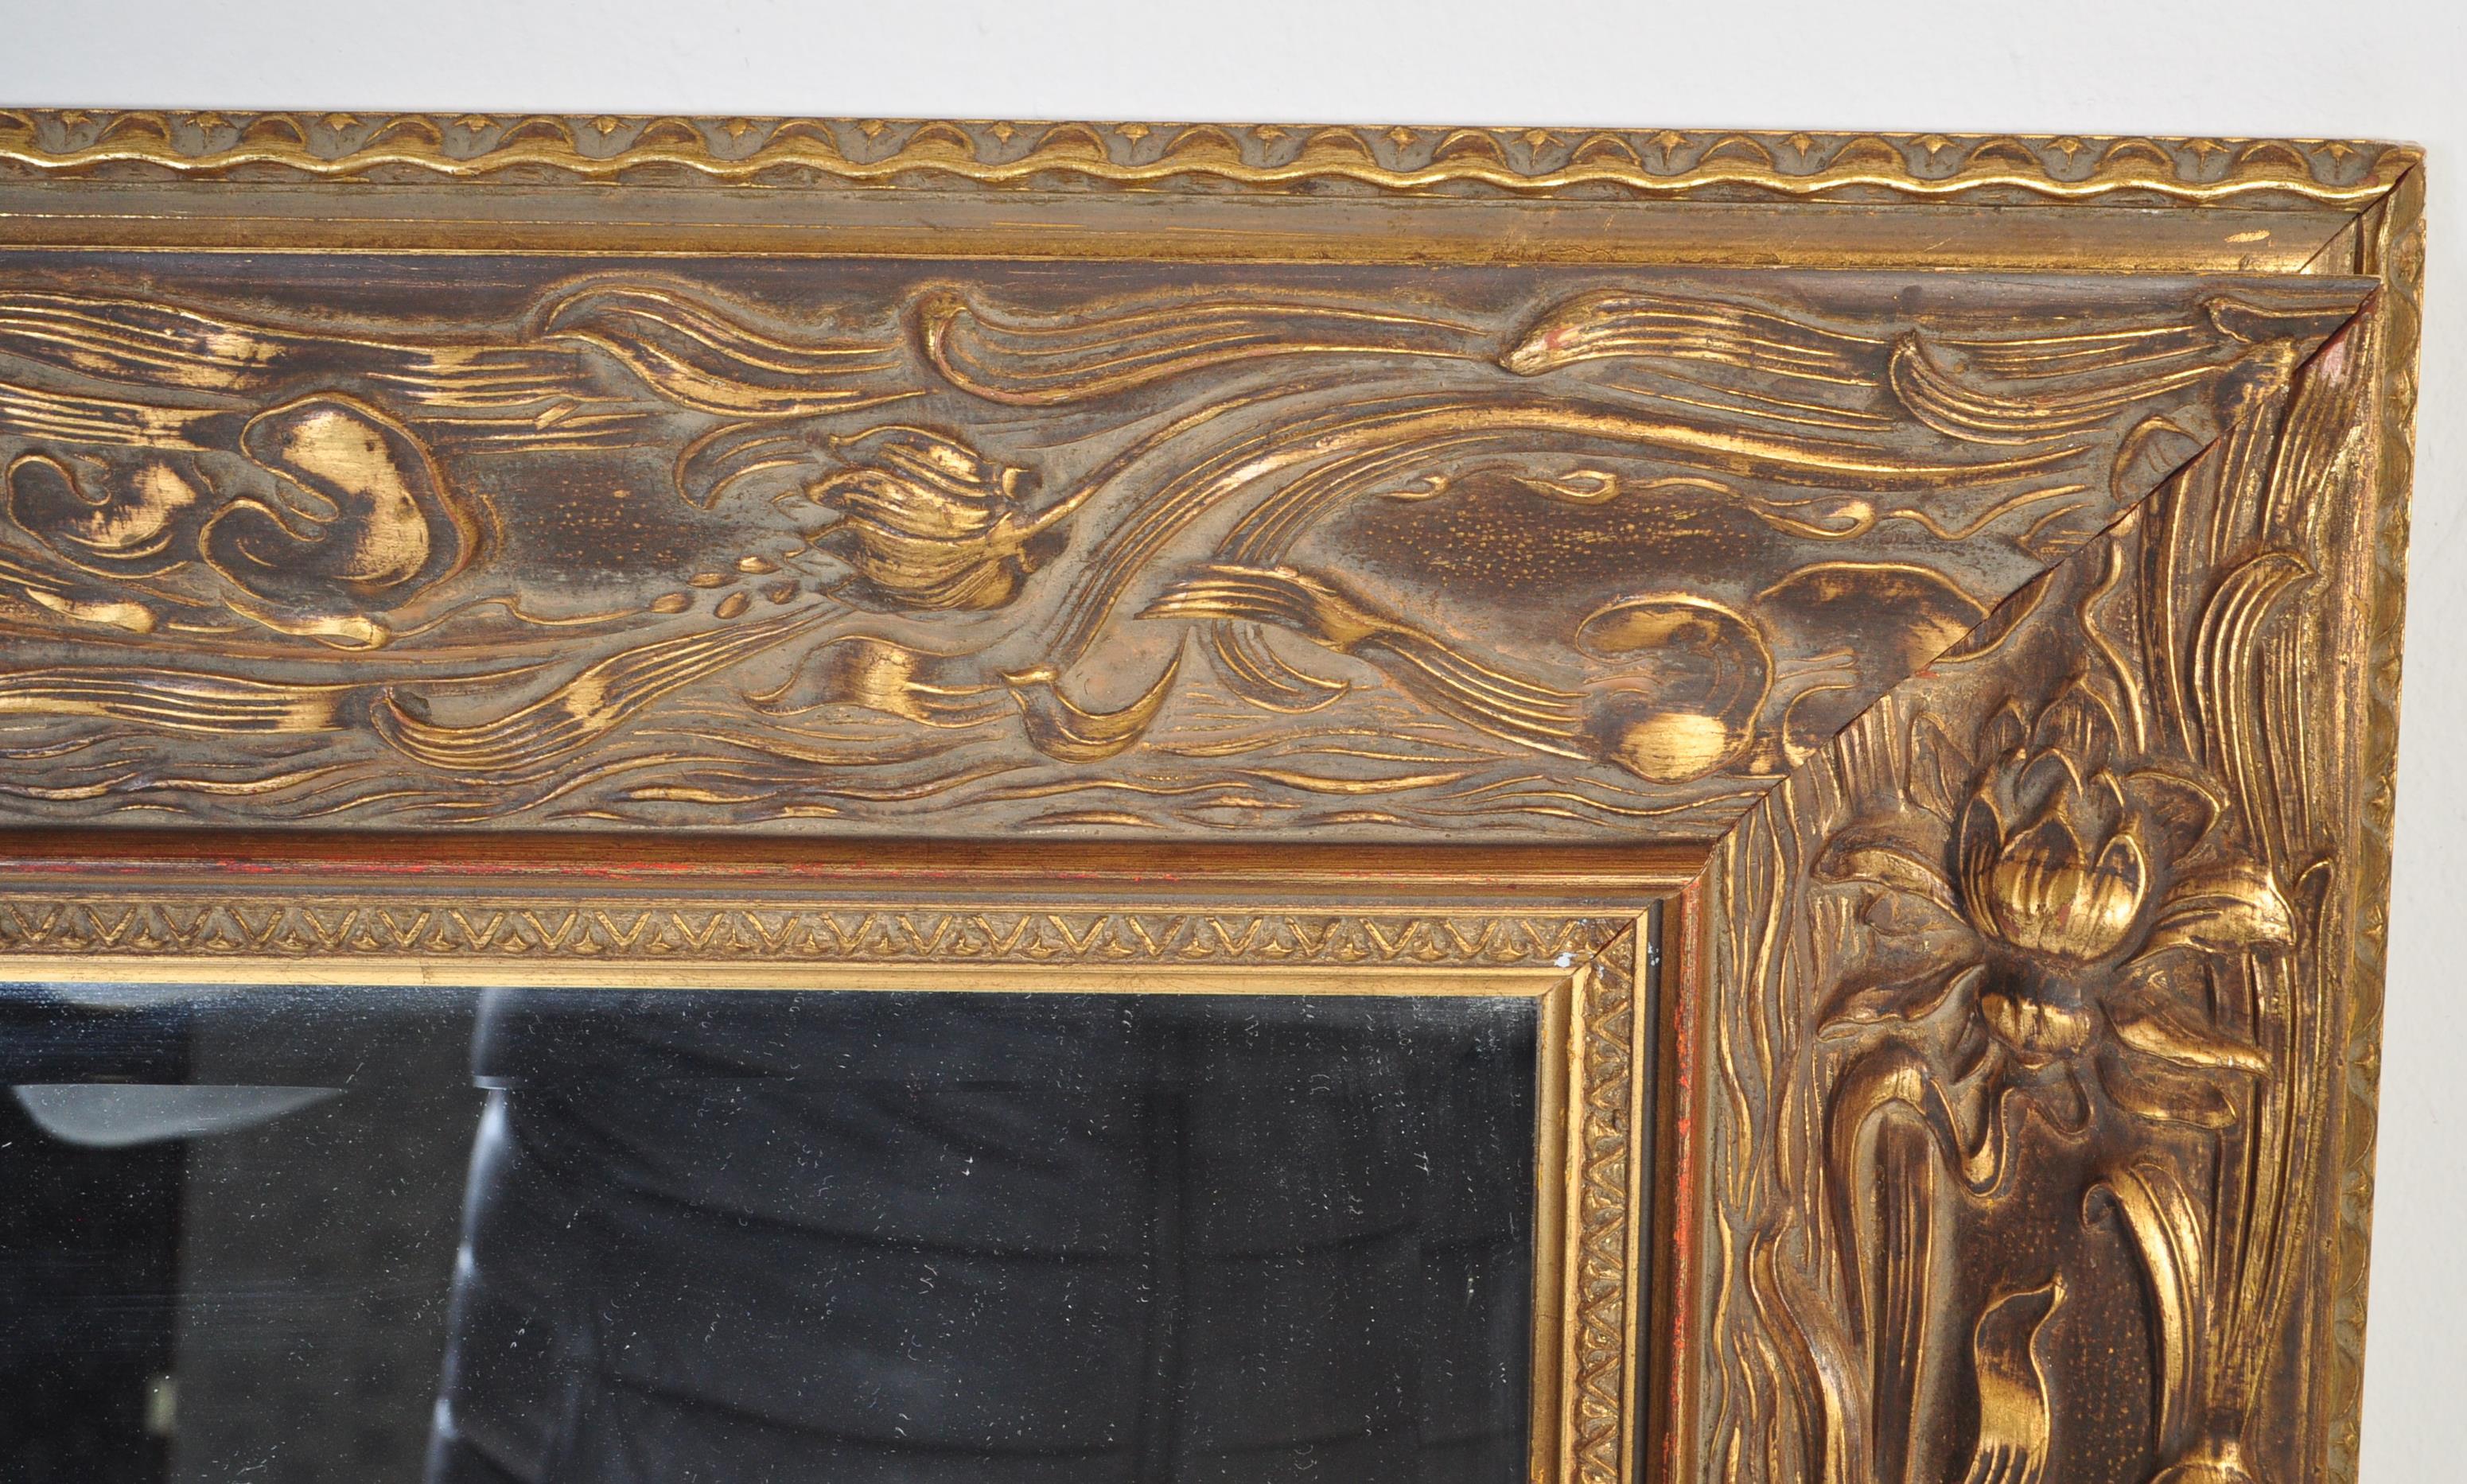 LARGE CARVED OVER MANTEL MIRROR - VINTAGE 20TH CENTURY - Image 8 of 8